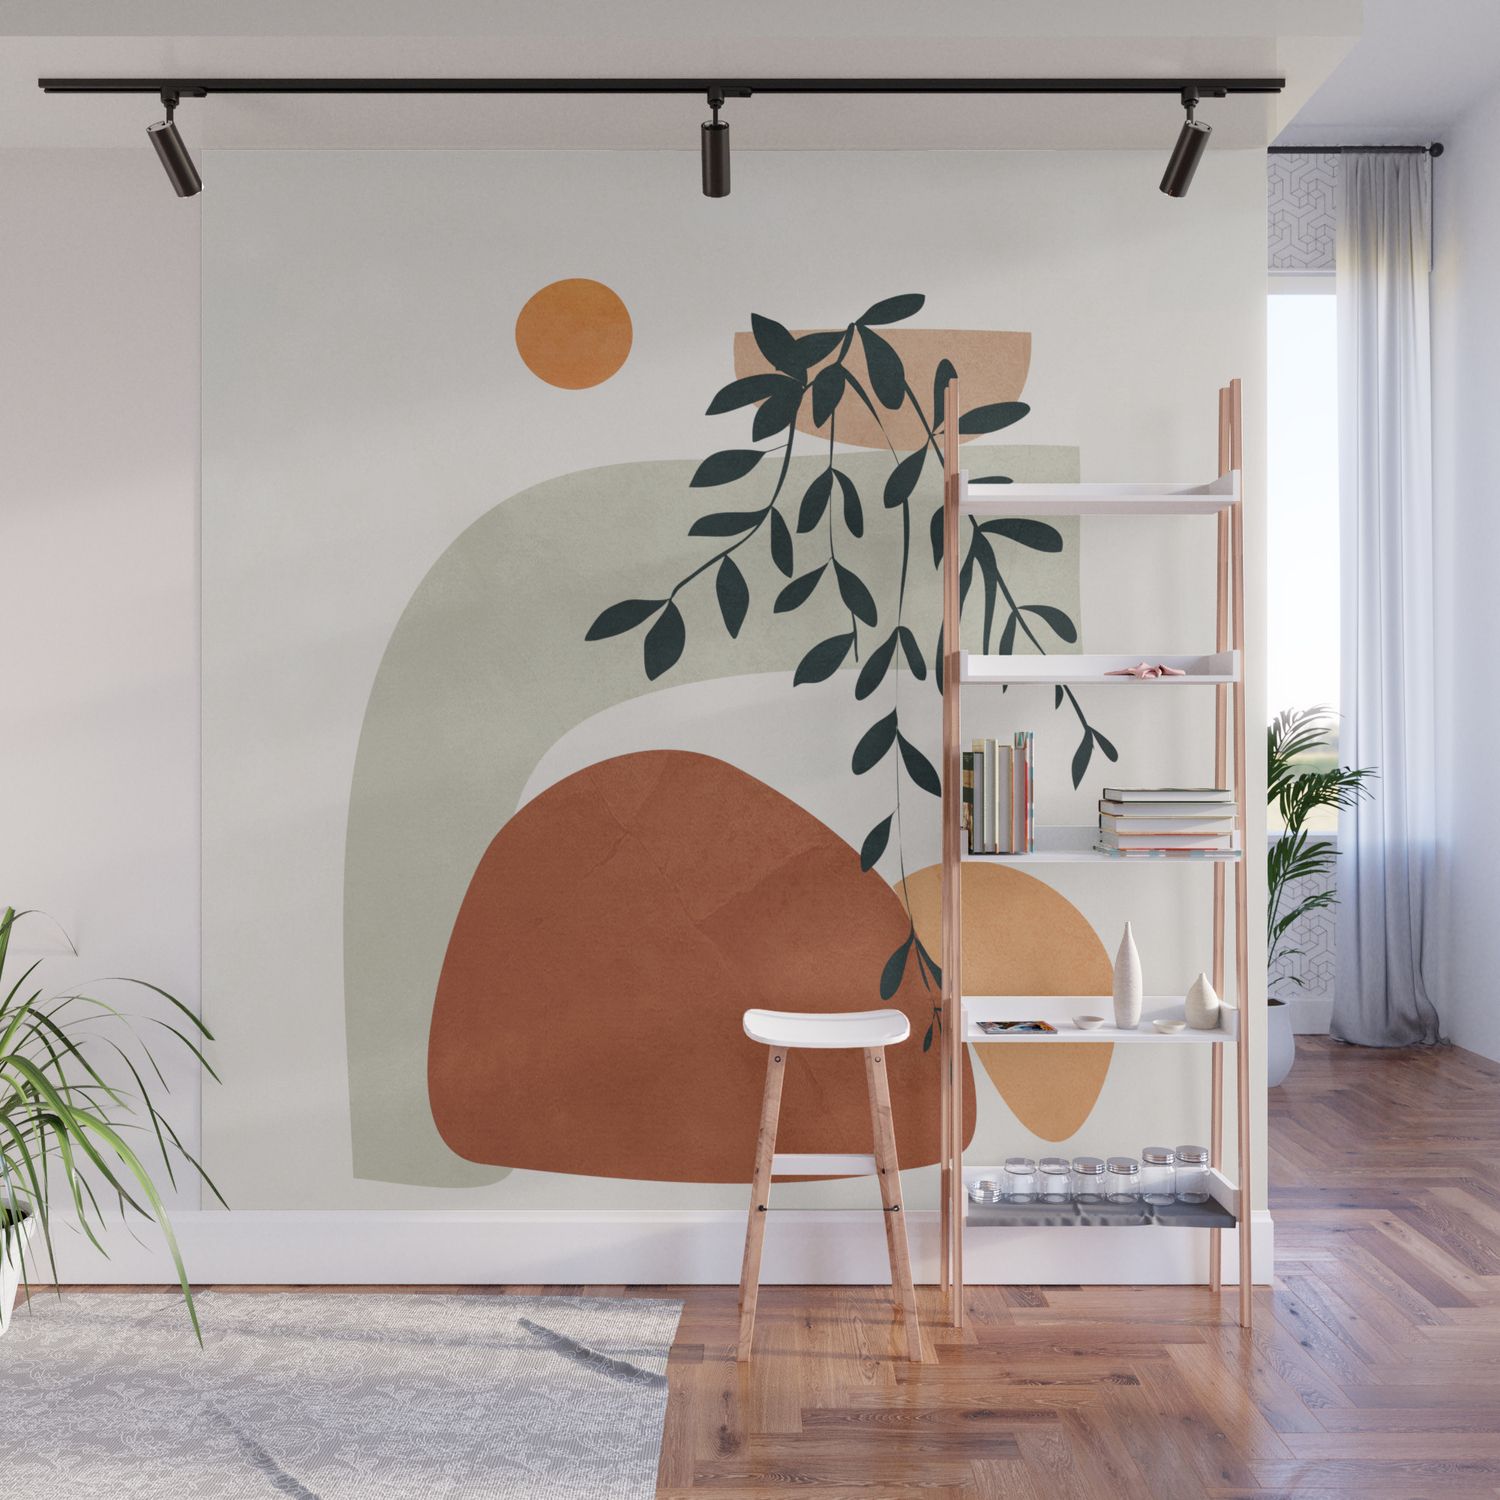 Soft Shapes I Wall Muralcity Art | Society6 With Soft Shapes Wall Art (View 7 of 15)